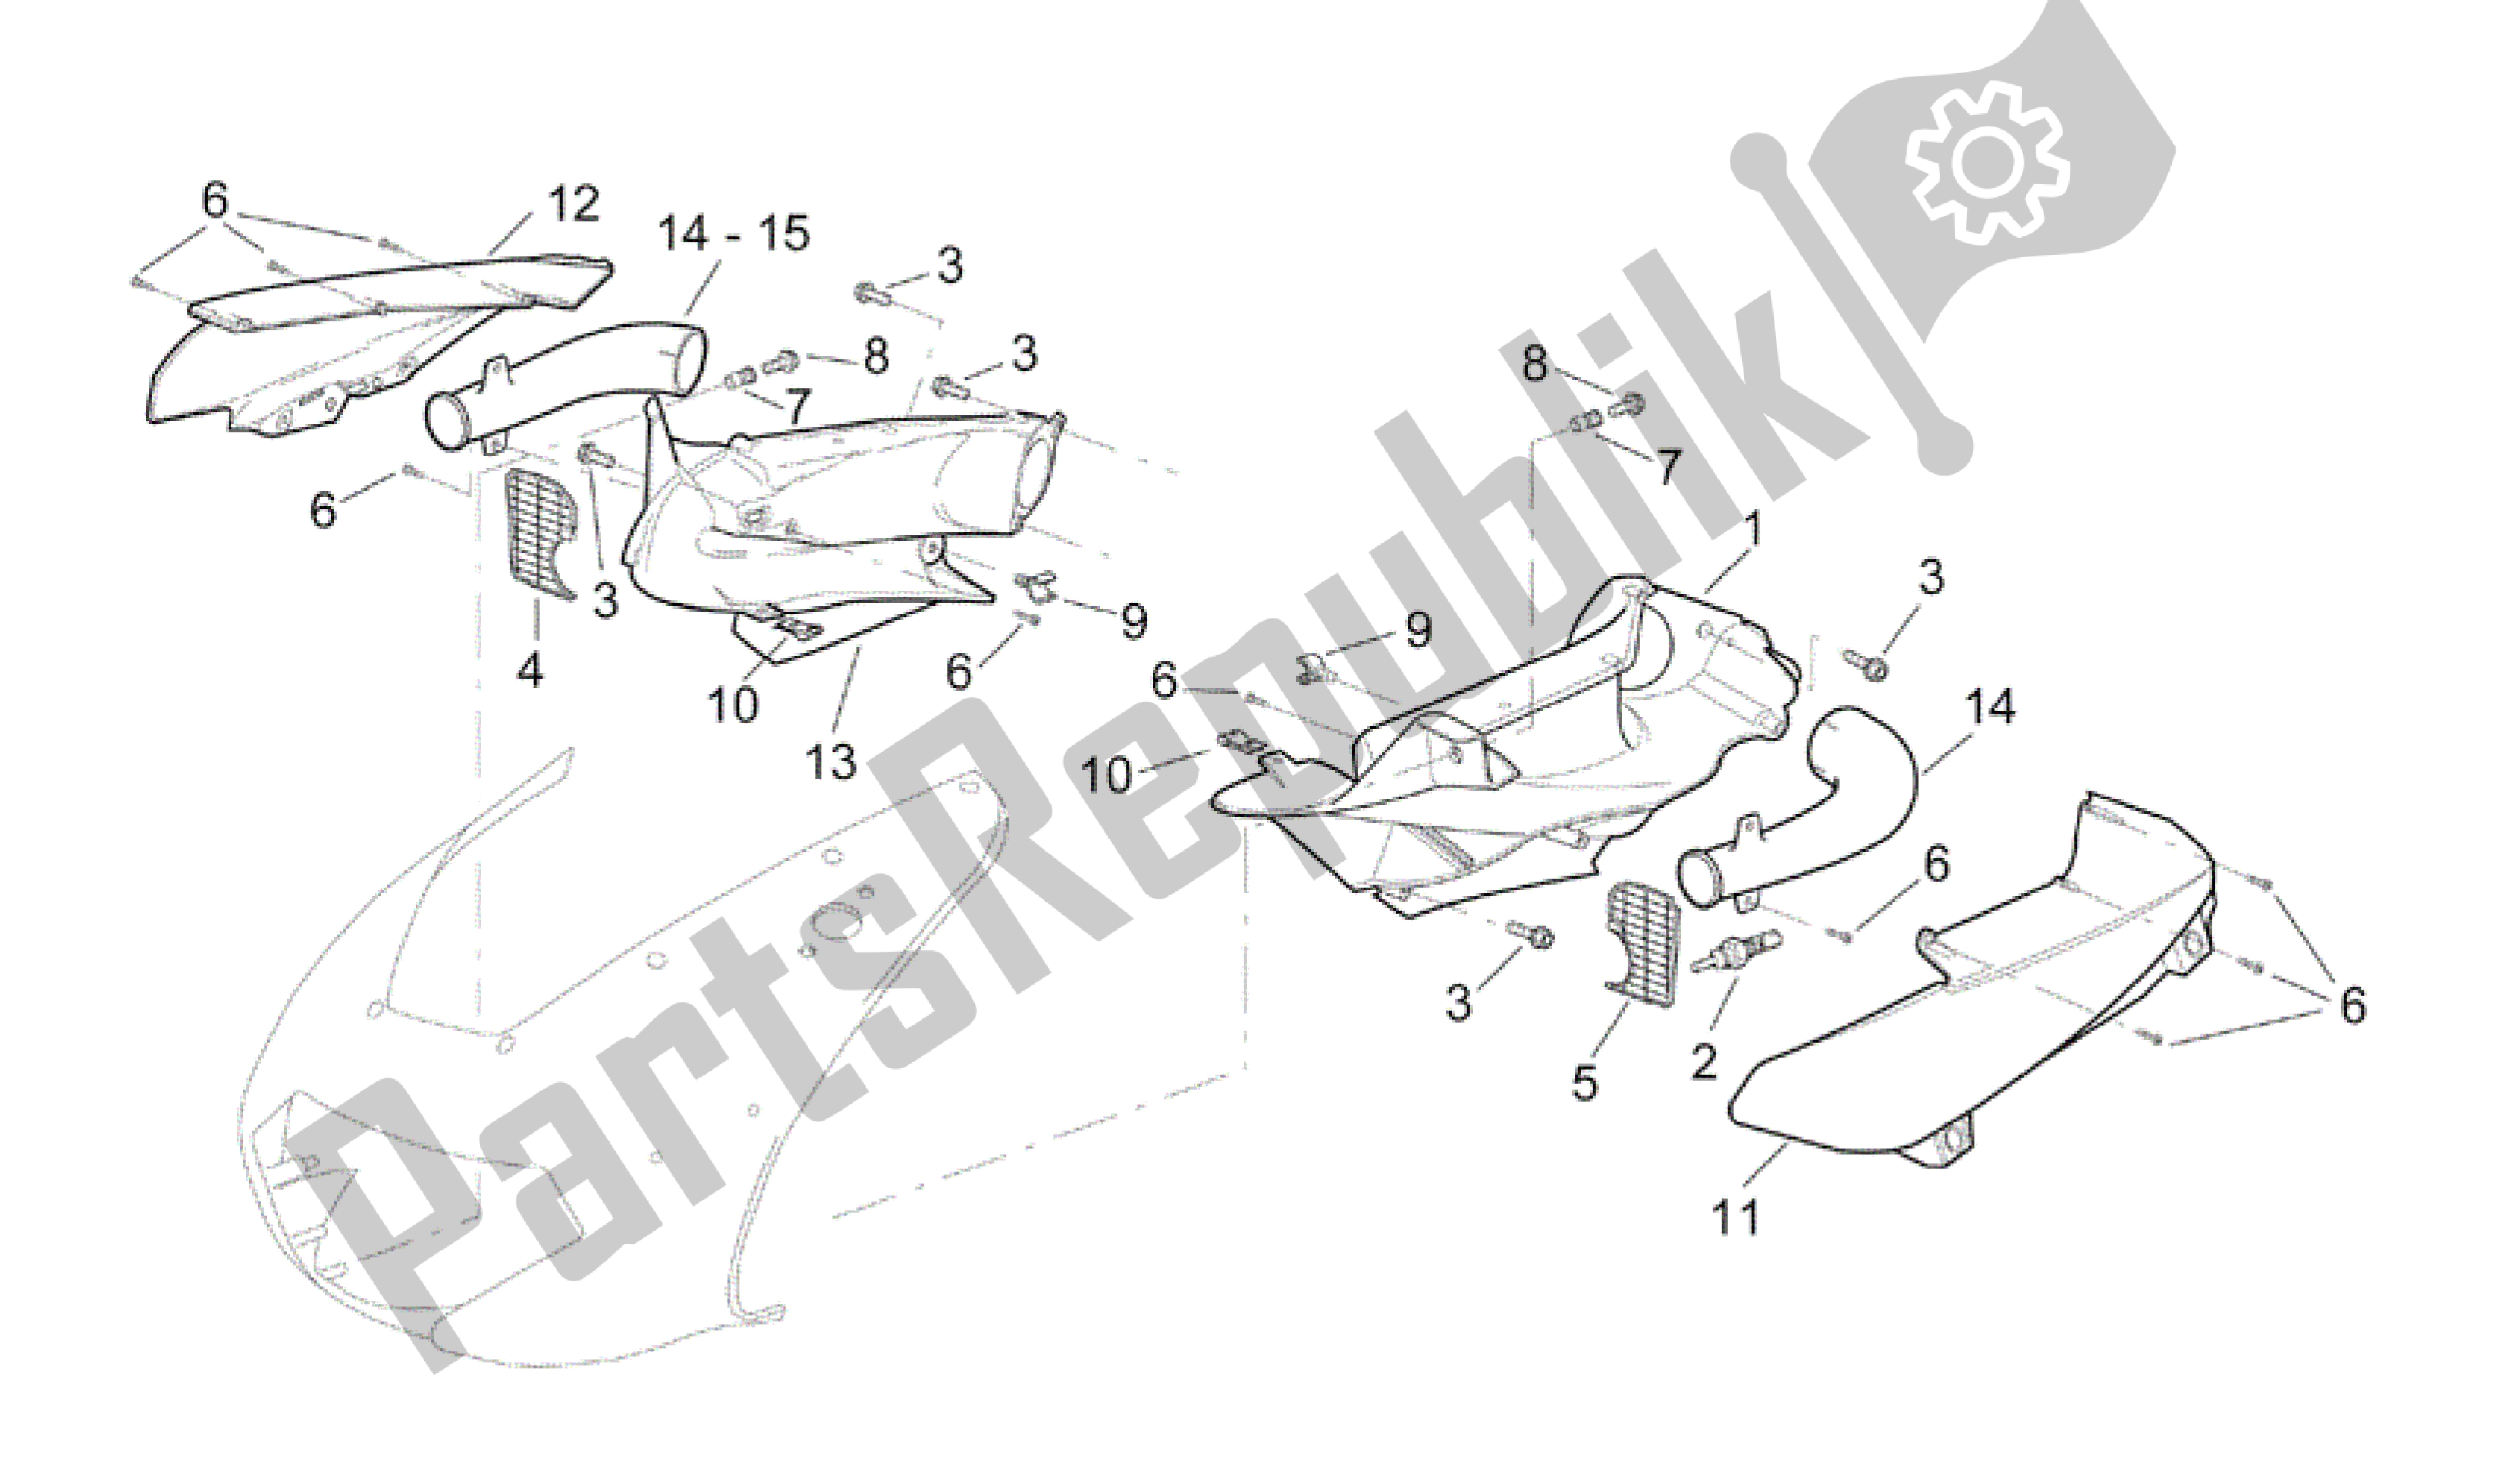 All parts for the Front Body - Duct of the Aprilia RSV Mille R GP1 Limited Edition 3963 1000 2003